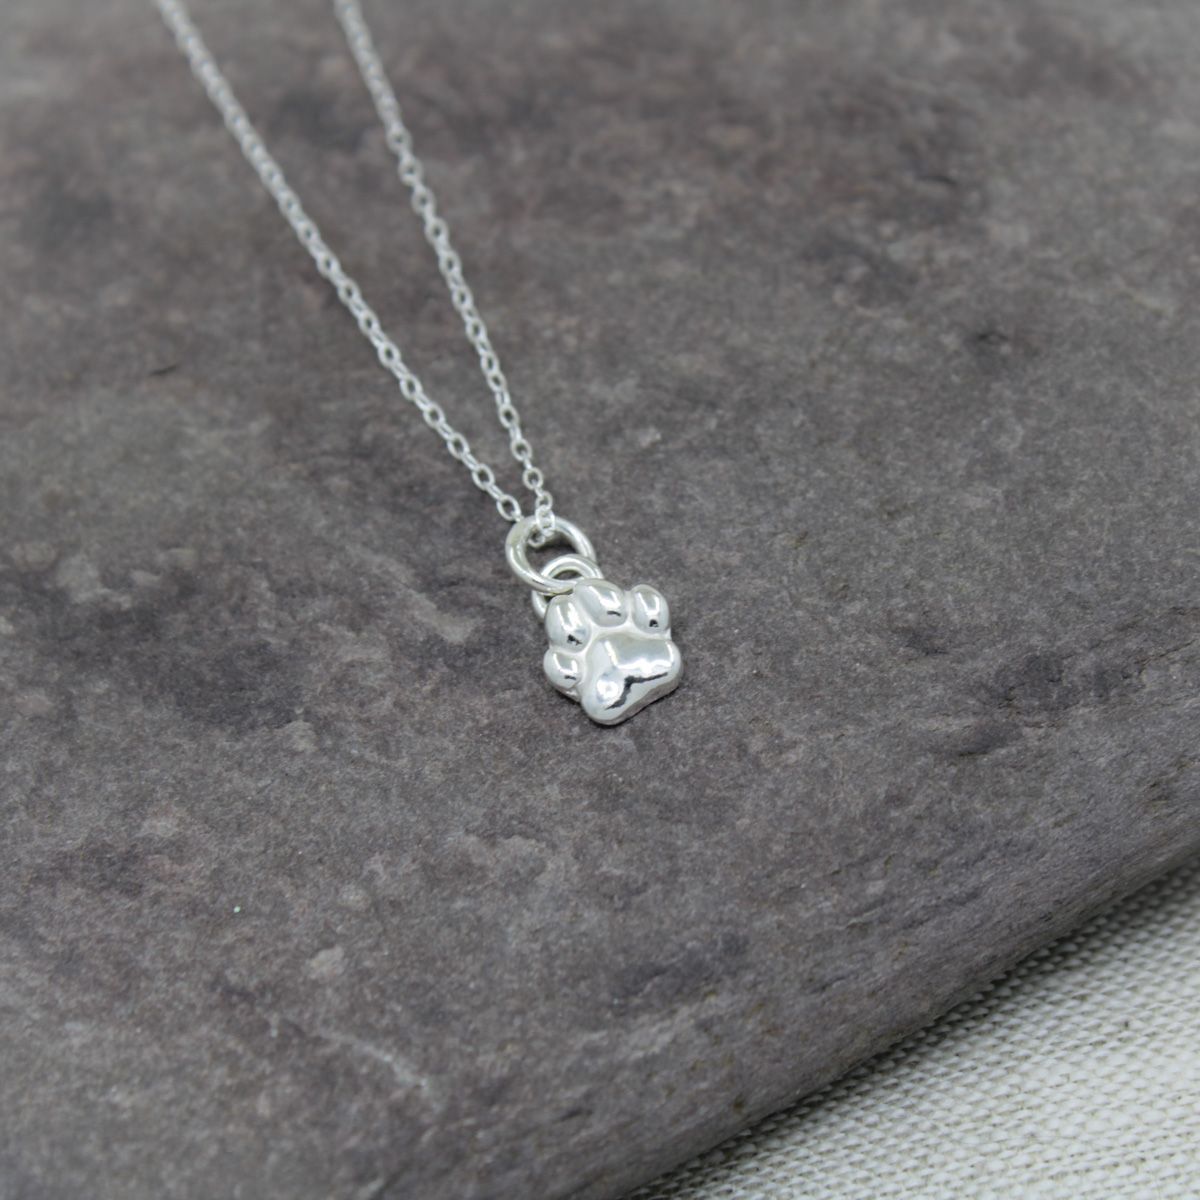 sterling - silver - paw - necklace - pendant.jpg